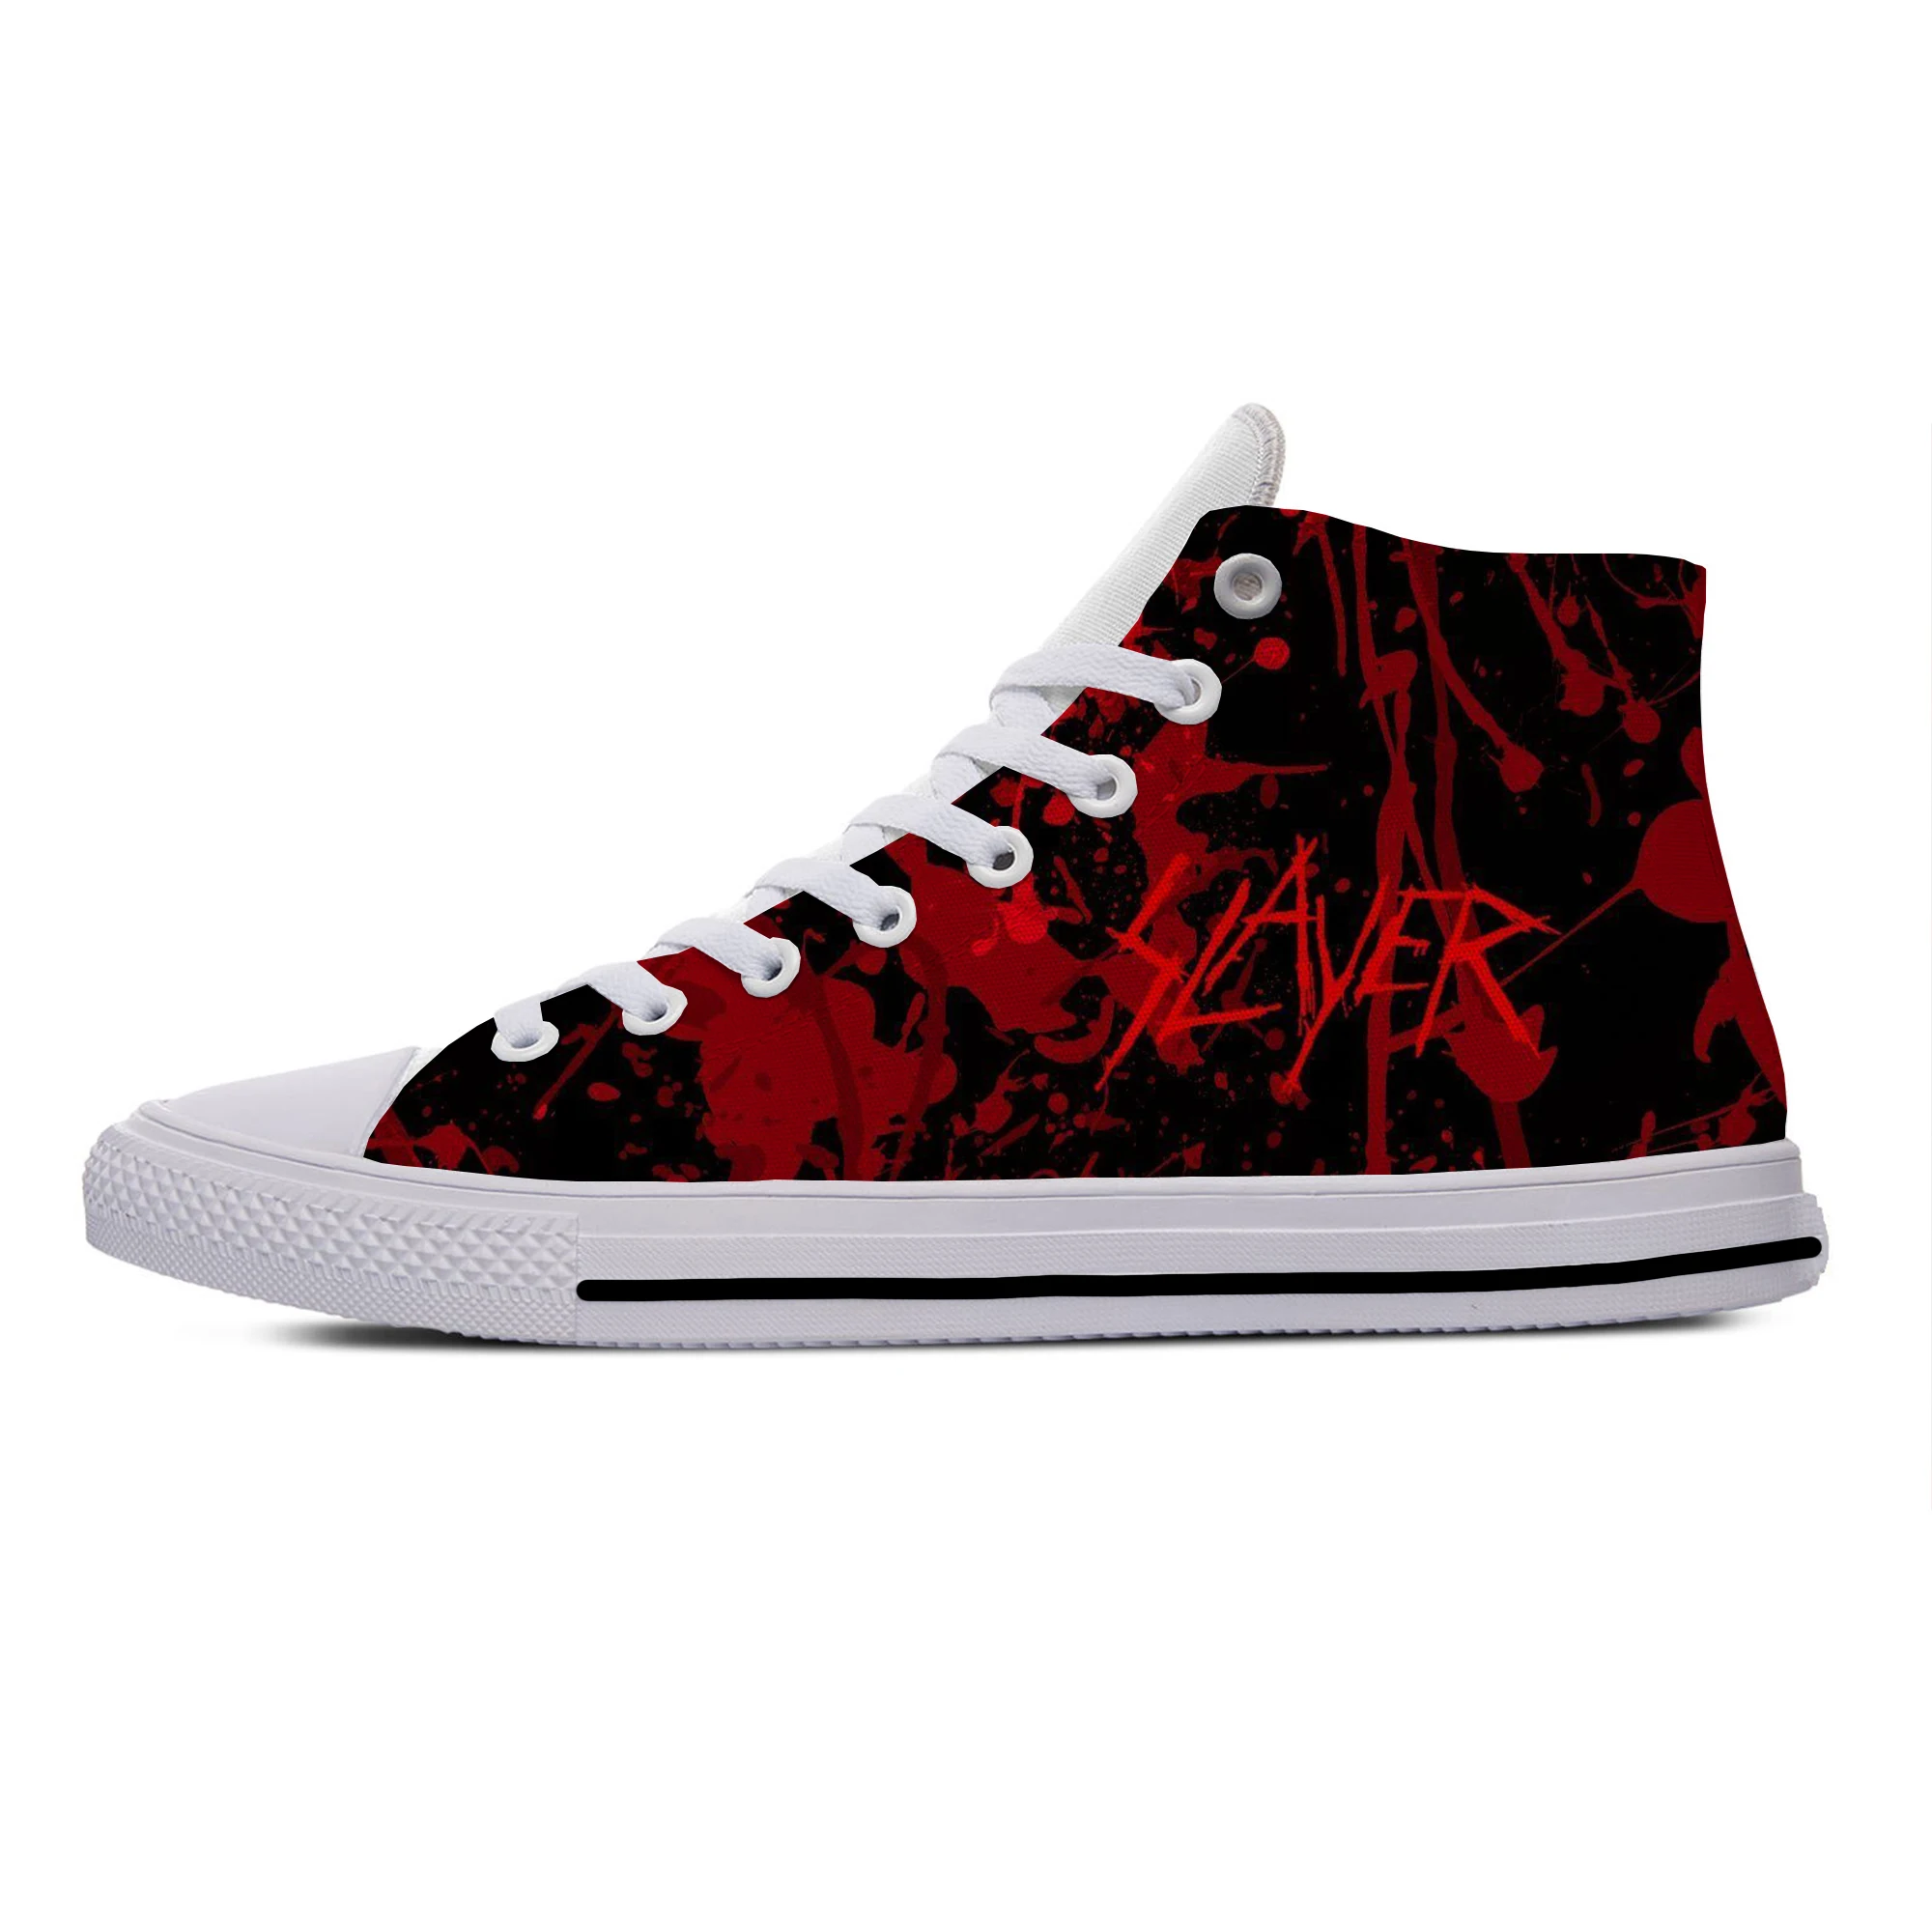 Slayer Heavy Metal Rock Band Horror Fashion Casual Cloth Shoes High Top  Lightweight Breathable 3d Printed Men Women Sneakers - Casual Sneakers -  AliExpress